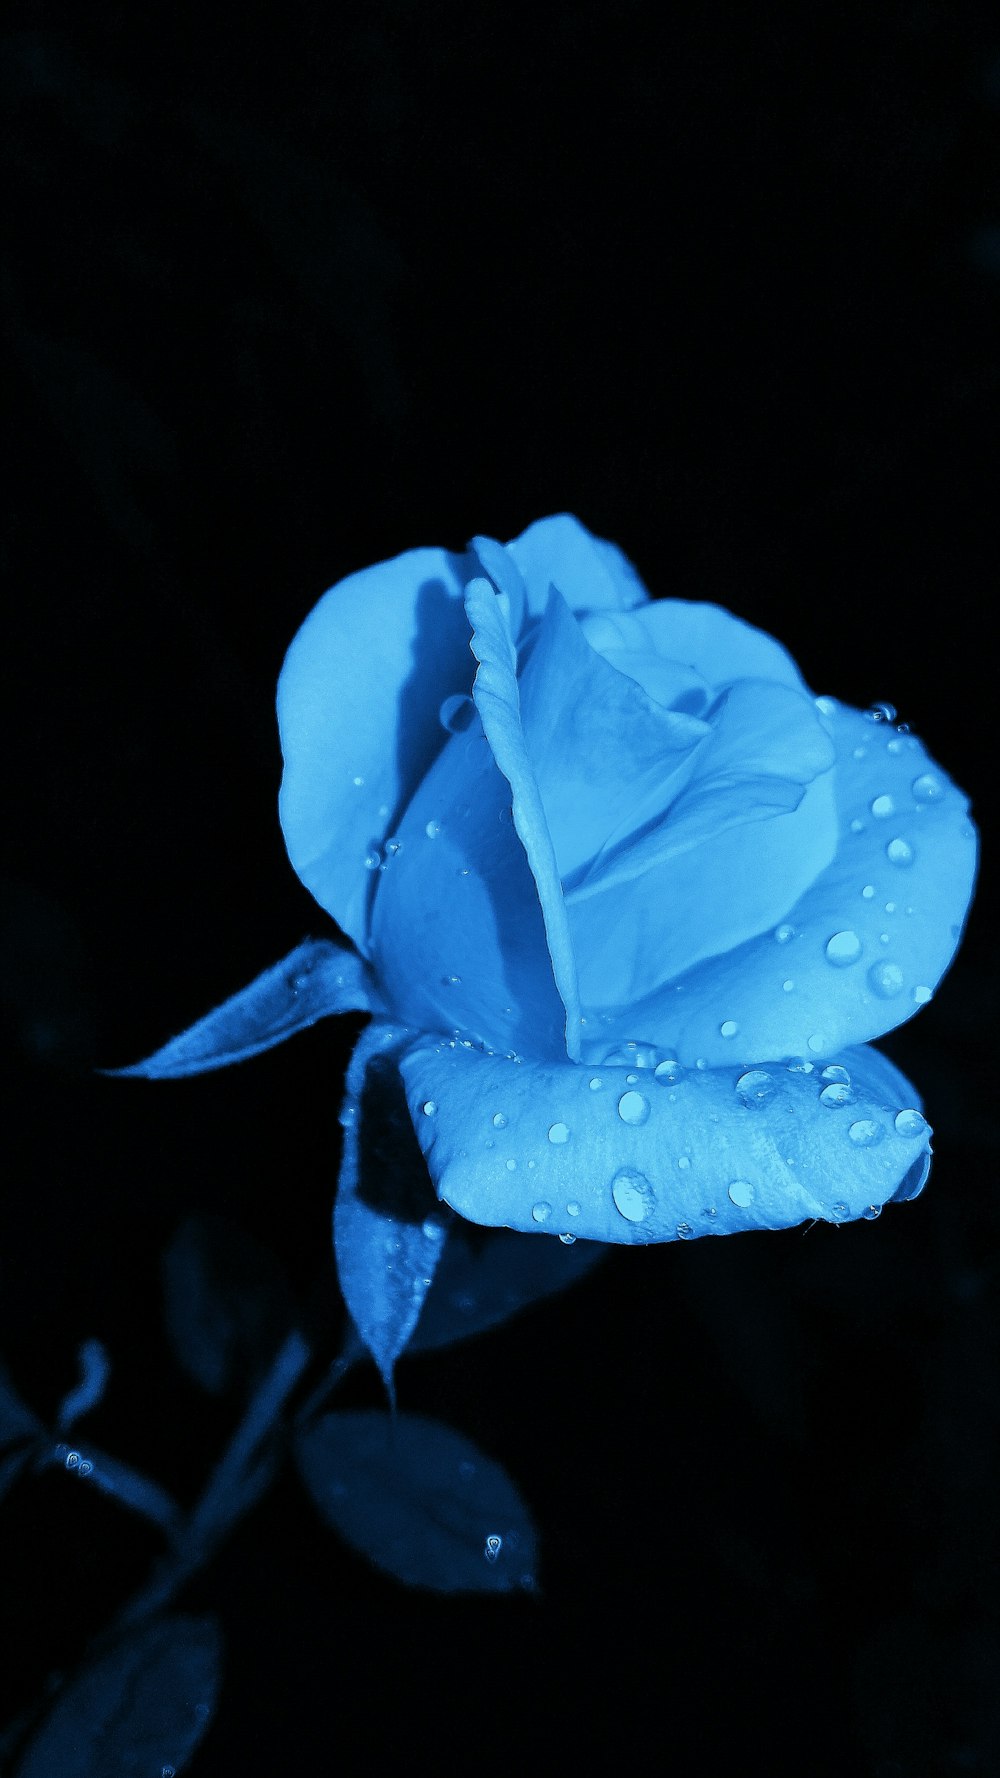 Blue Rose With Water Droplet Photo Free Flower Image On Unsplash